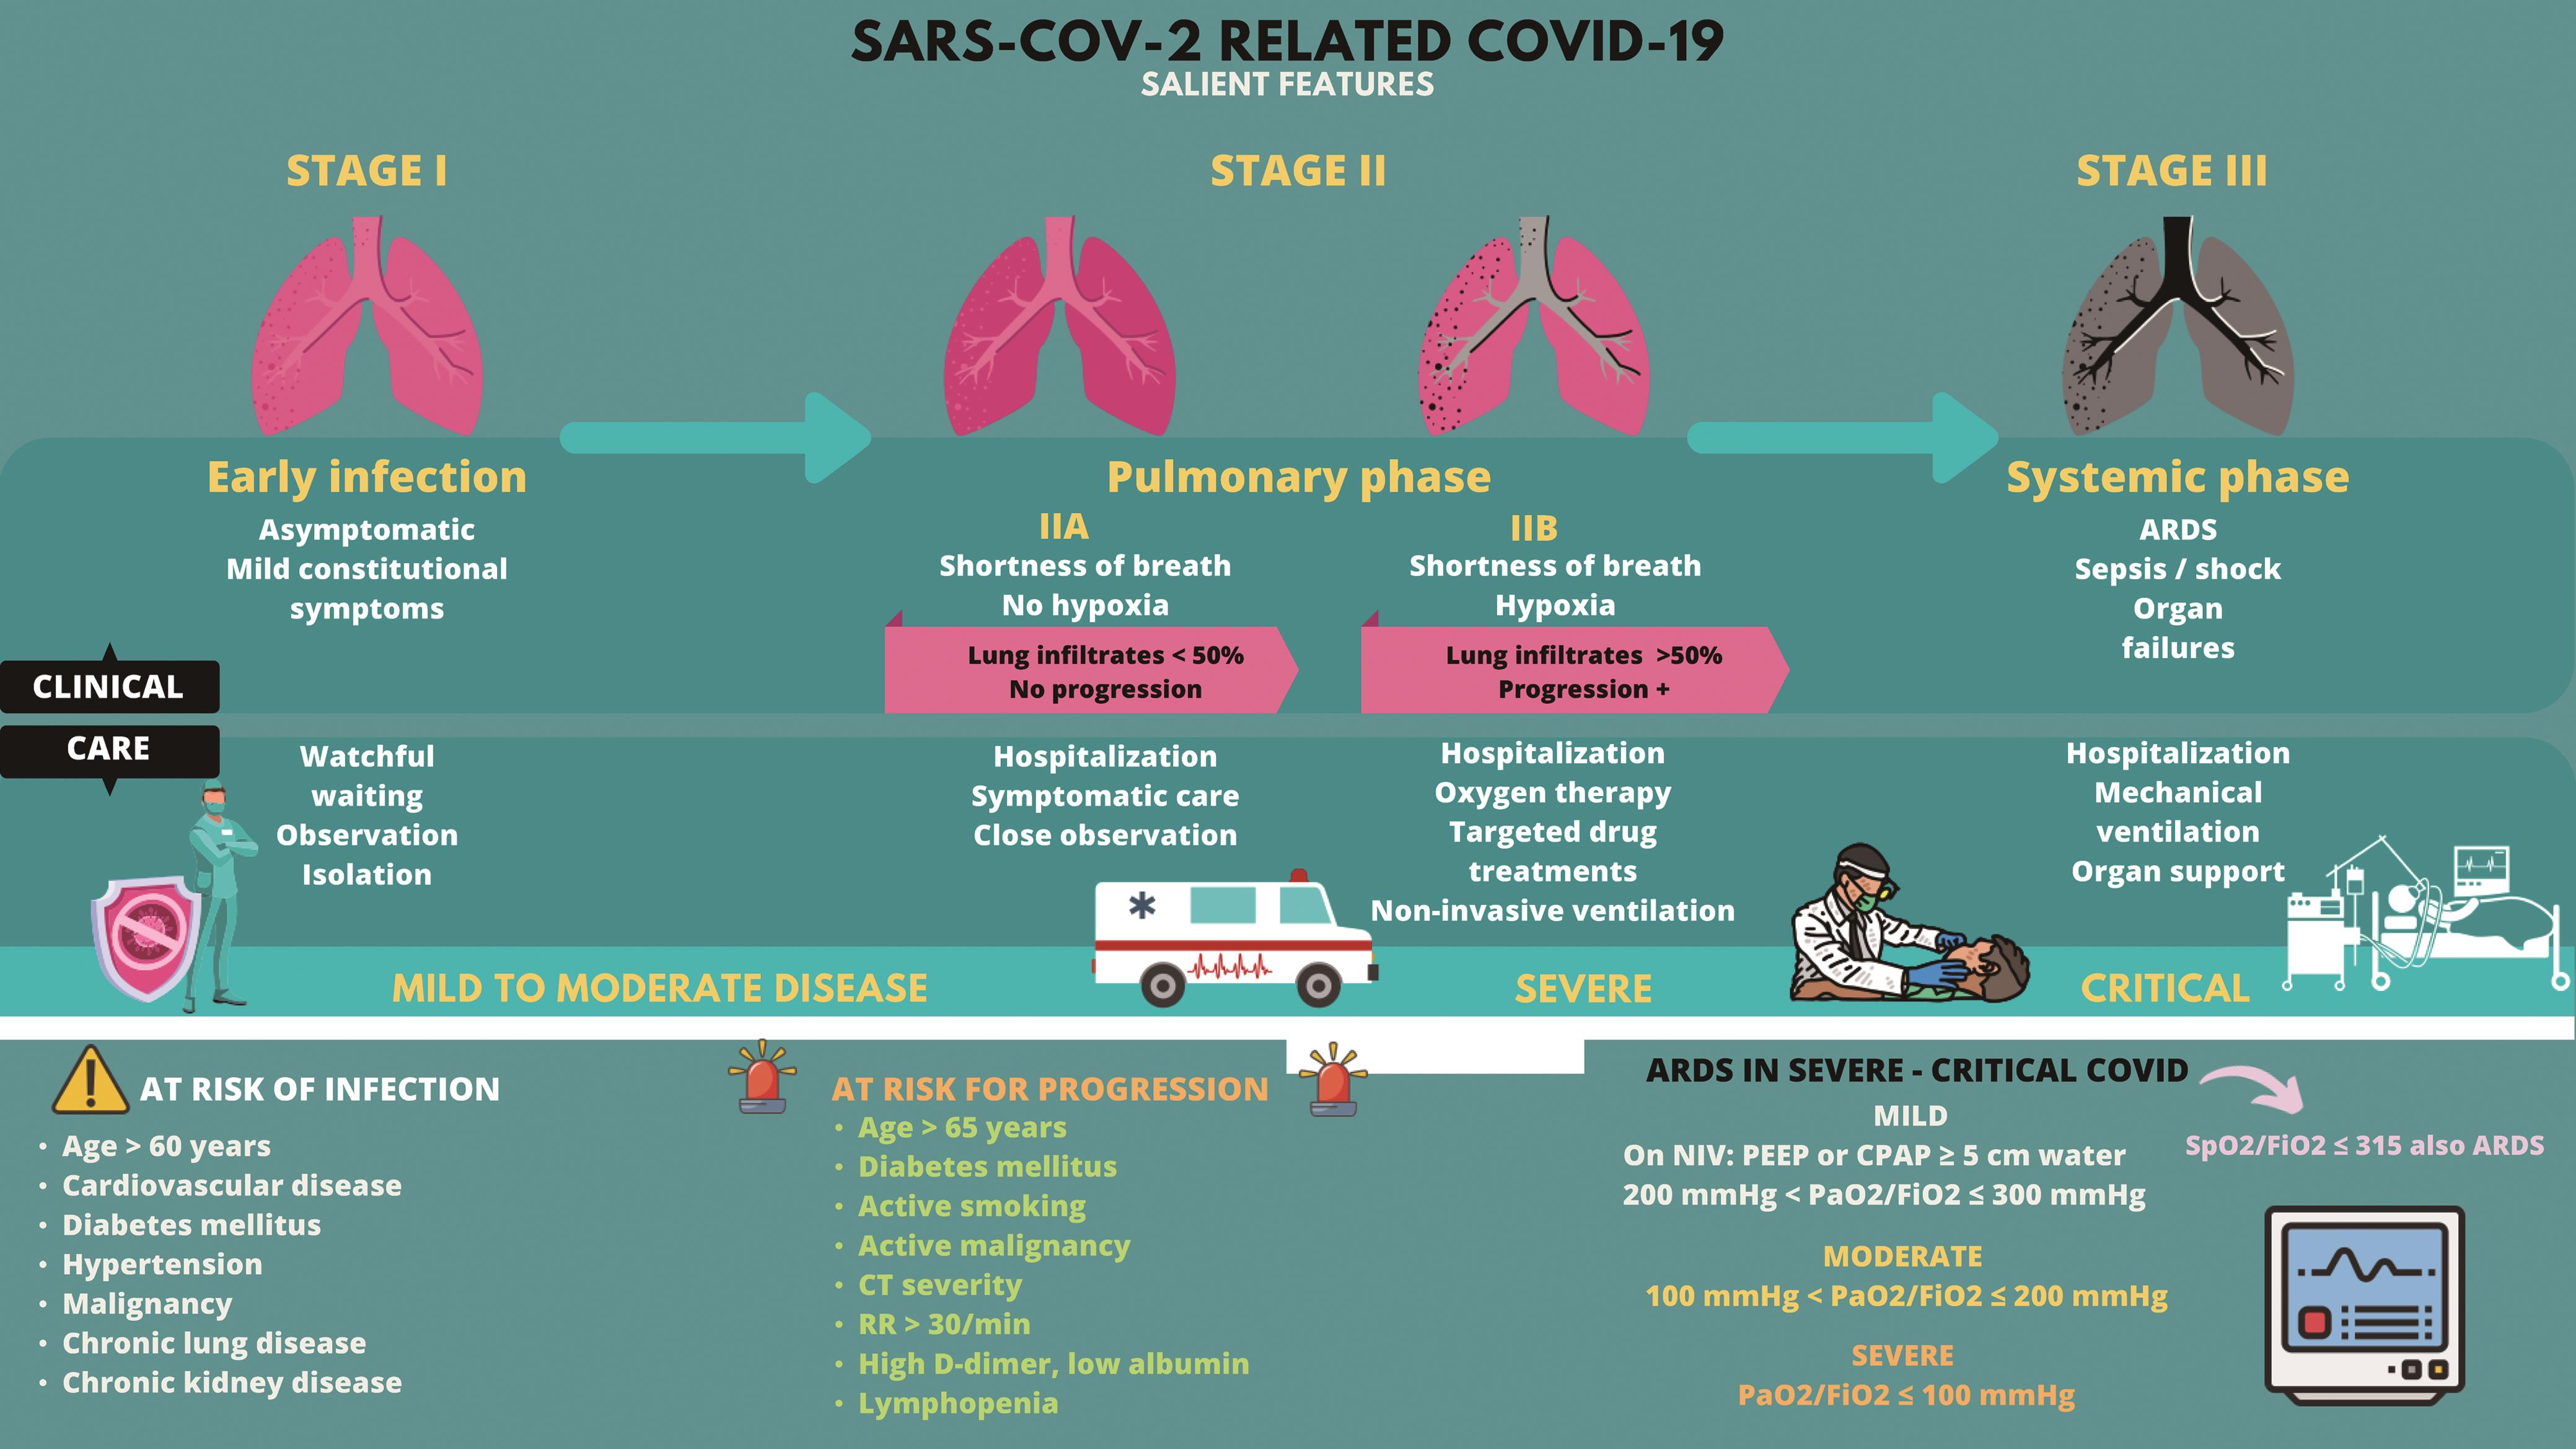 Salient features of SARS-CoV-2-related COVID-19.